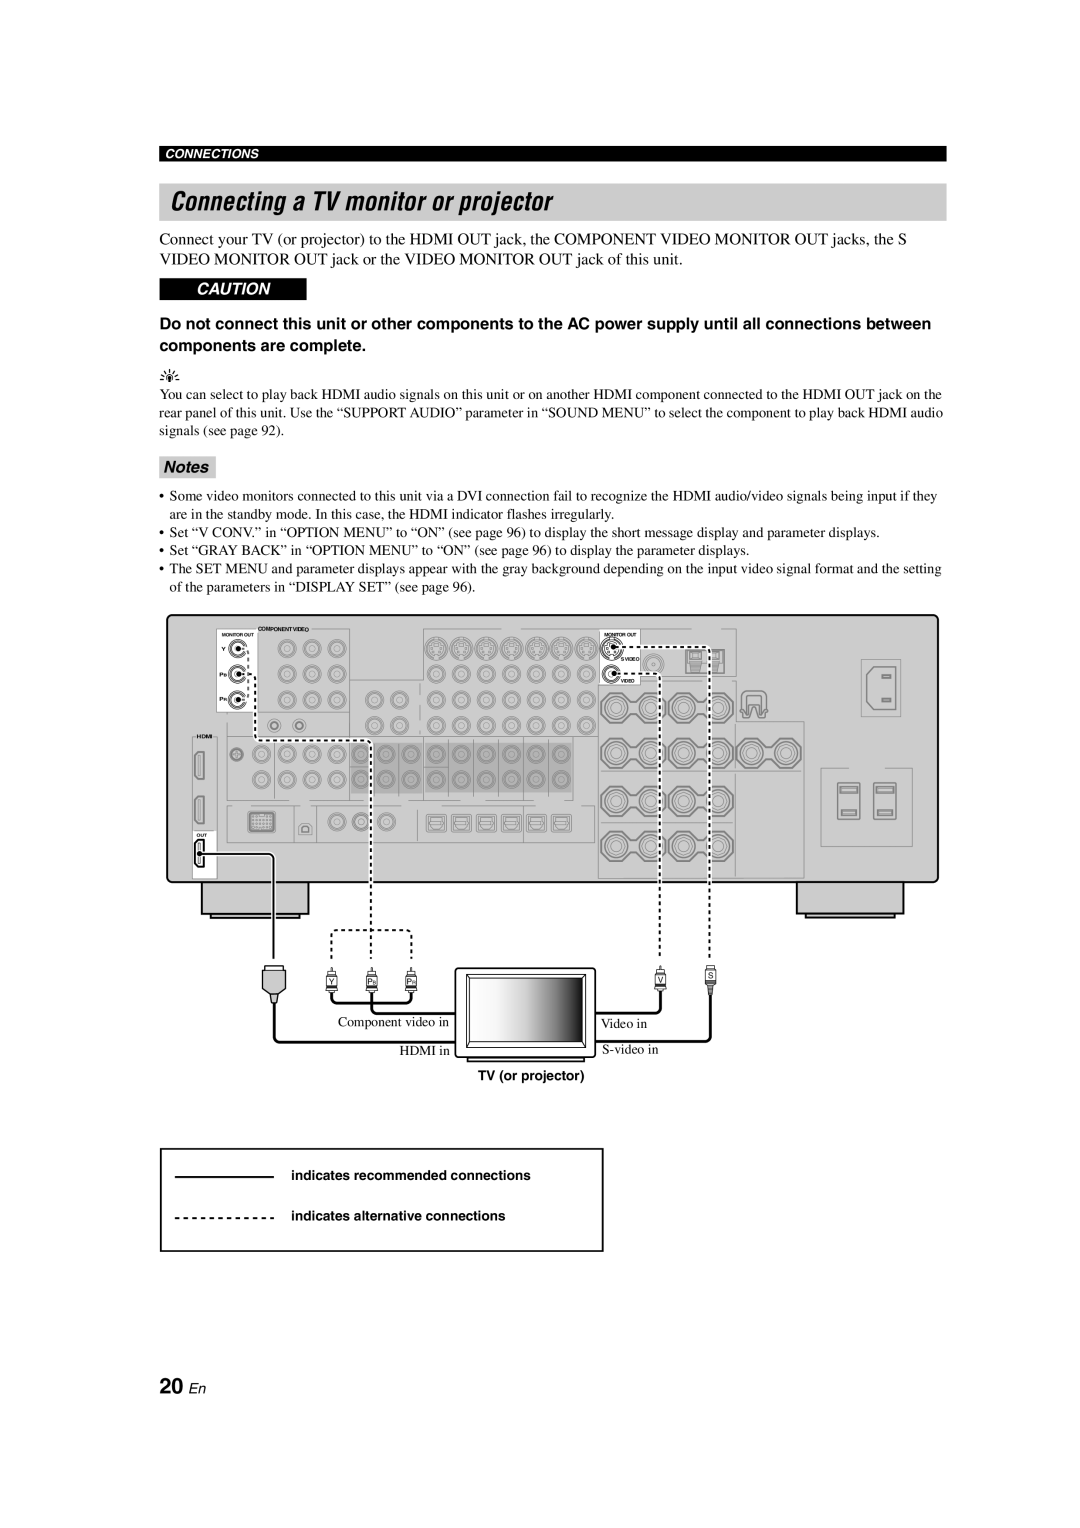 Yamaha HTR-6090 owner manual Connecting a TV monitor or projector, 20 En, Notes 